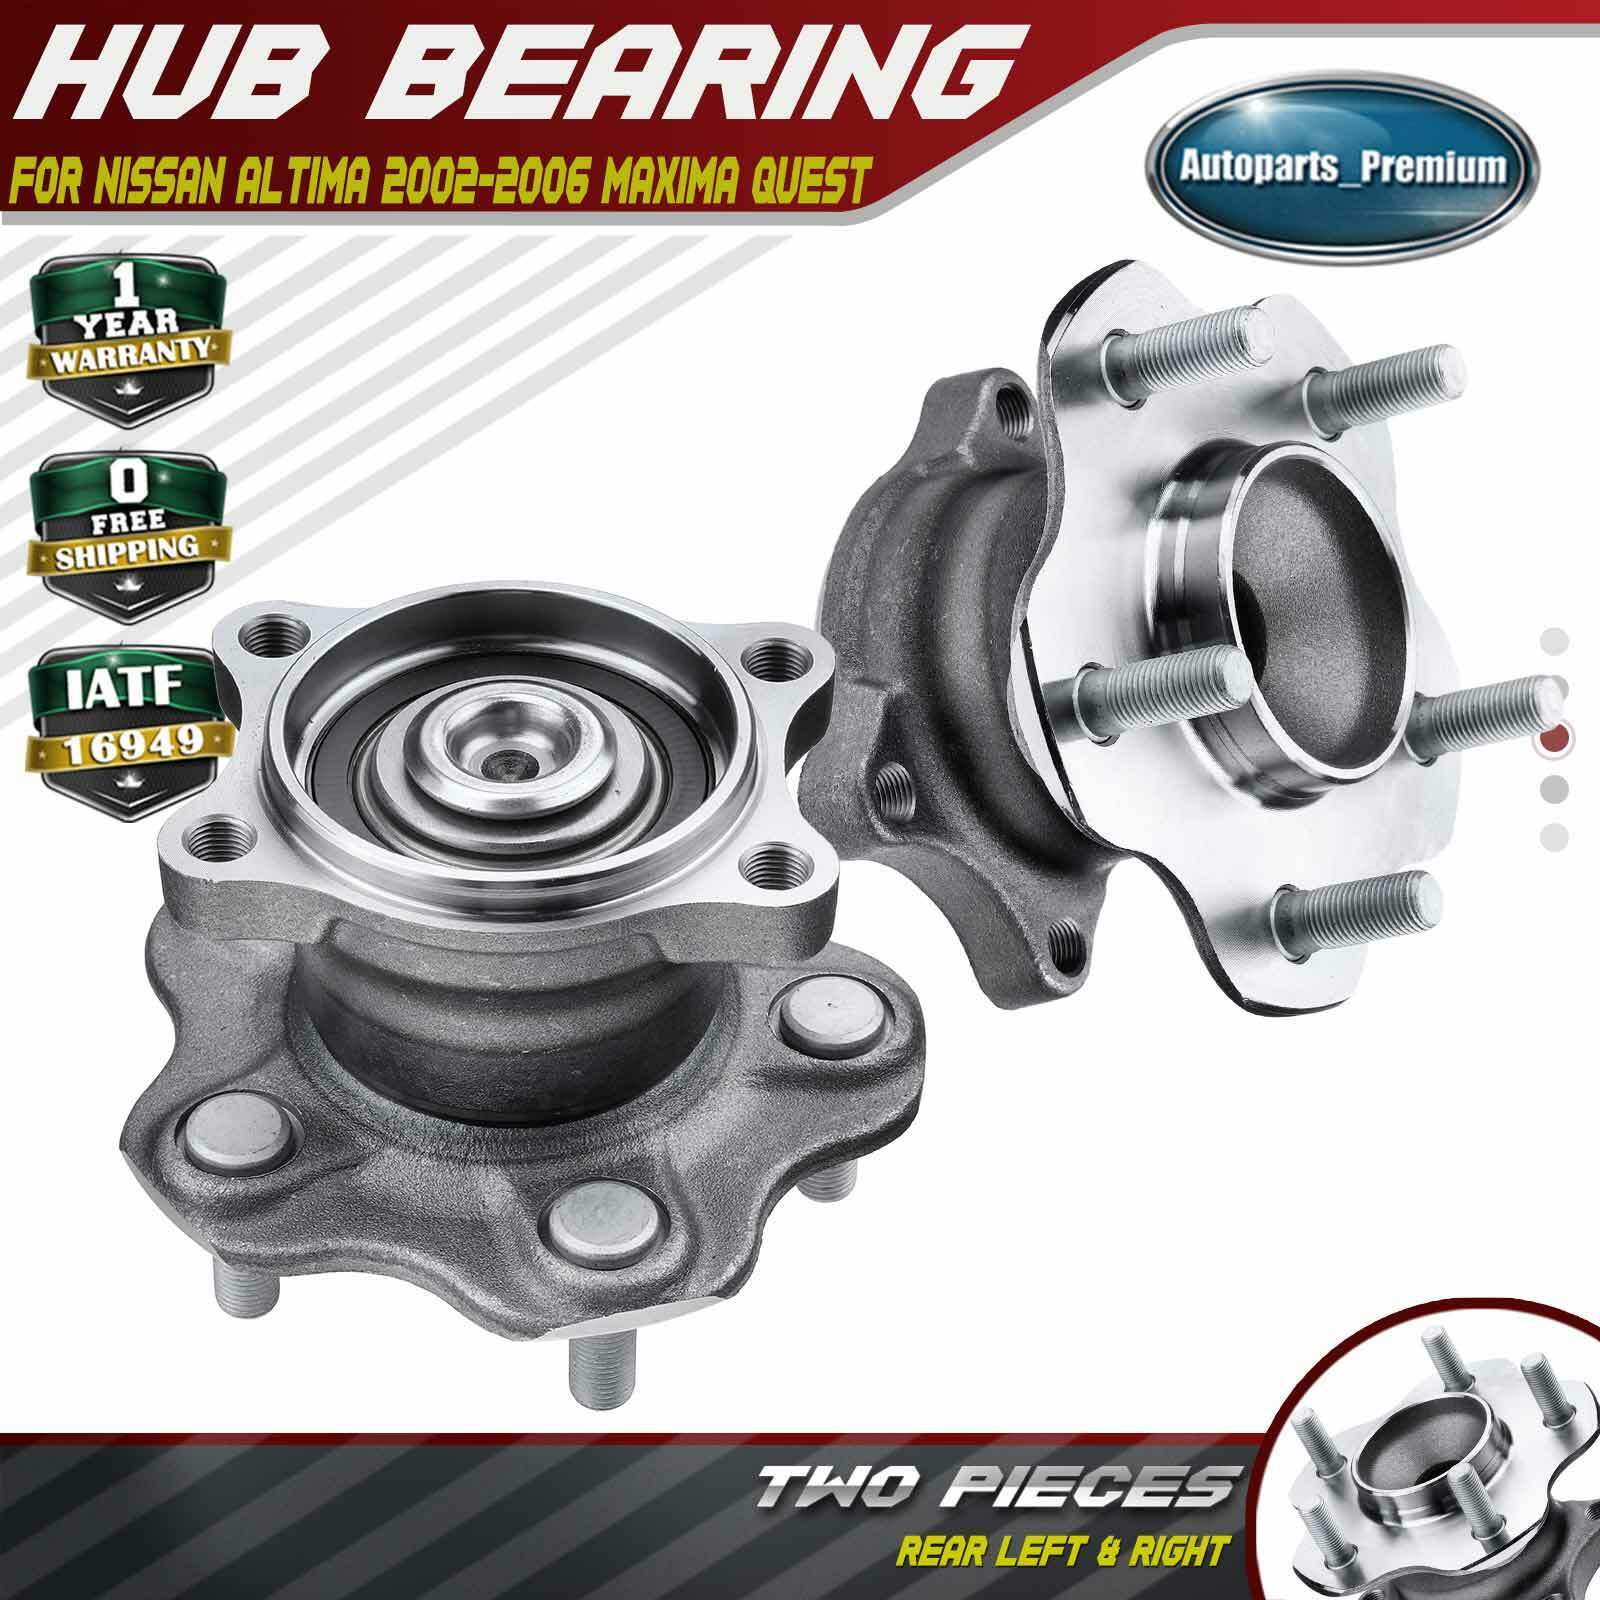 Rear LH & RH Wheel Bearing Hub Assembly for Nissan Altima 2002-2006 Maxima Quest